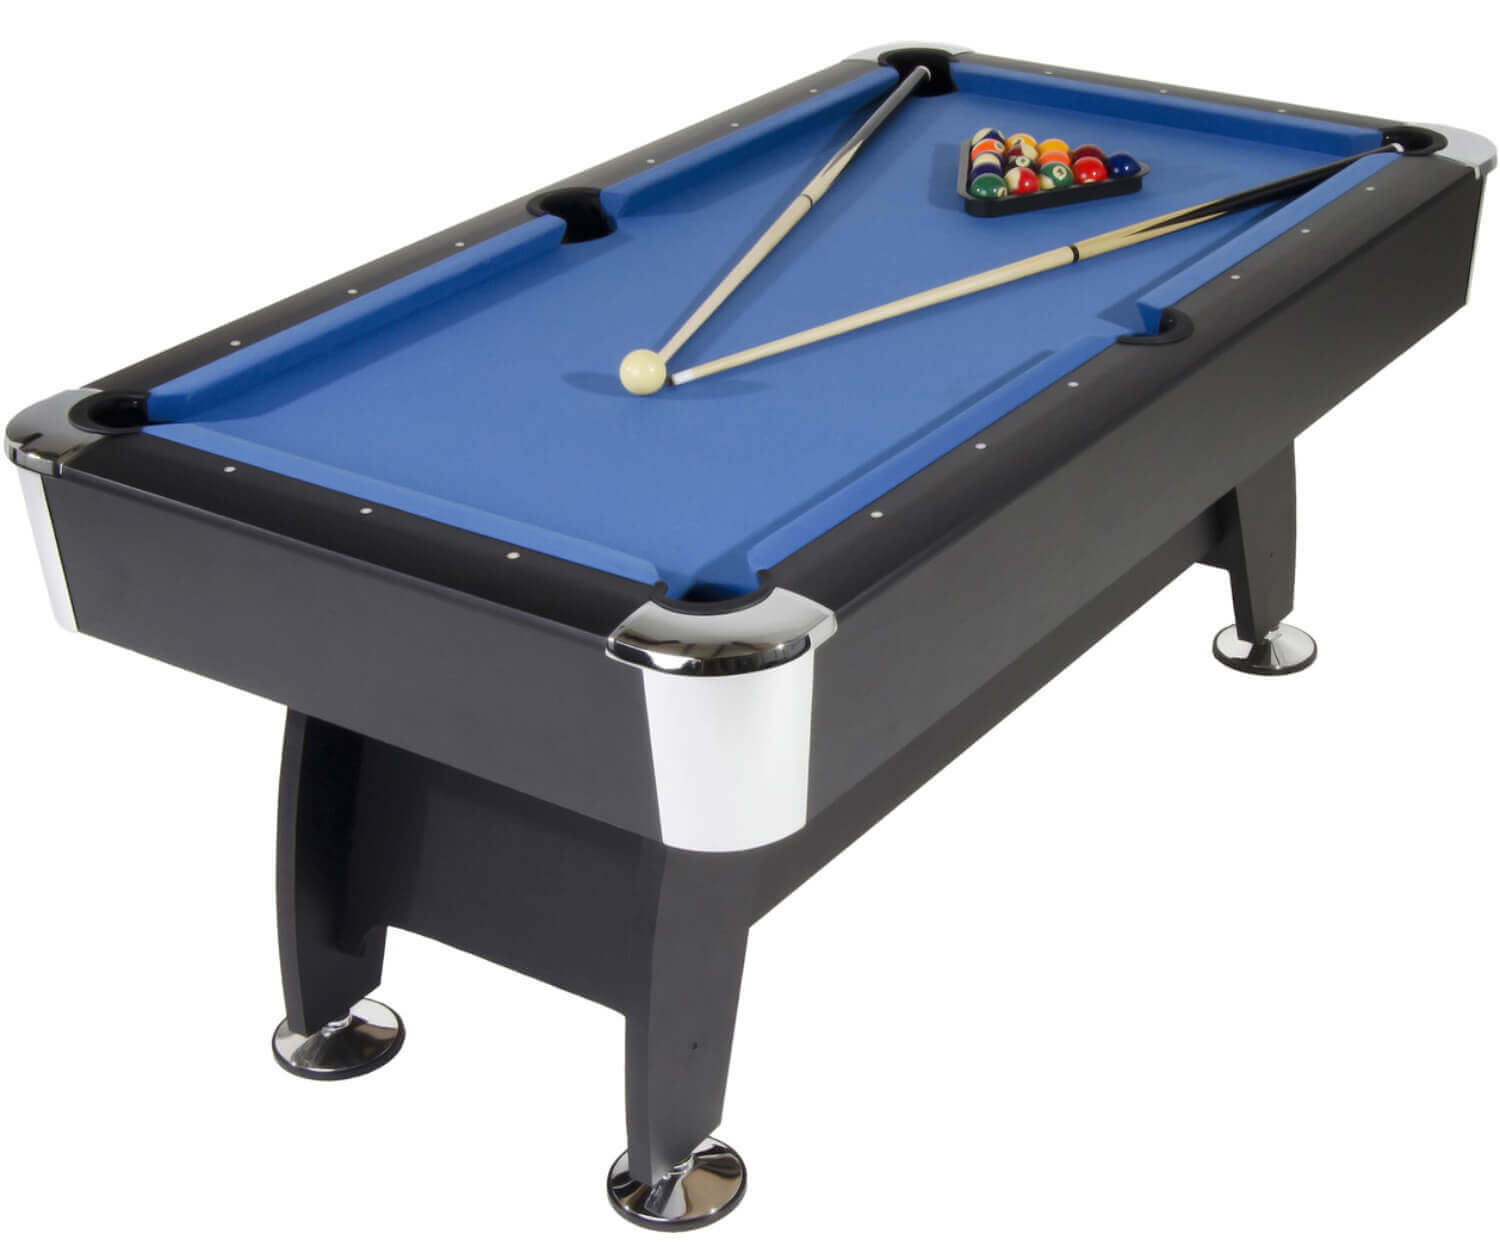 Buy Pool Tables, Snooker Tables, American Style Billiards Online at  Discounted Price / Cost in India